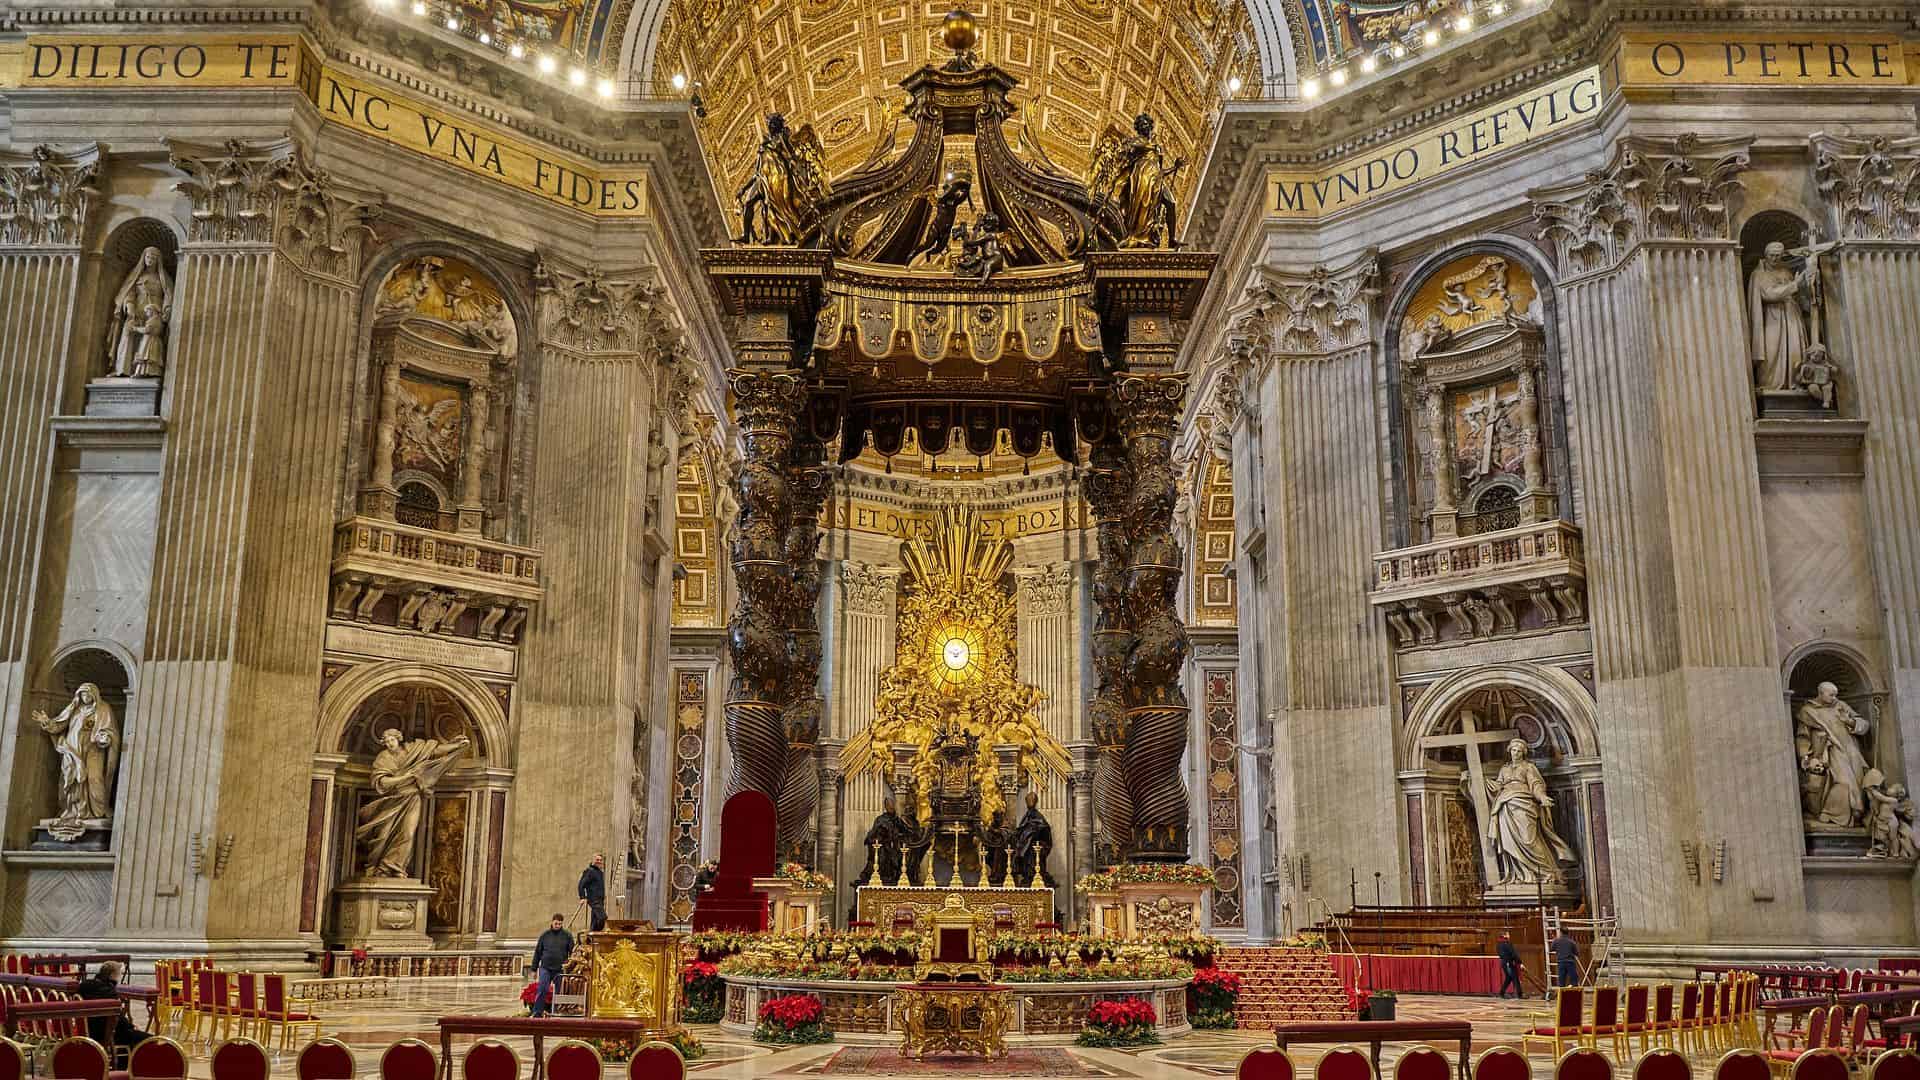 View of the alter in St. Peter's Basilica